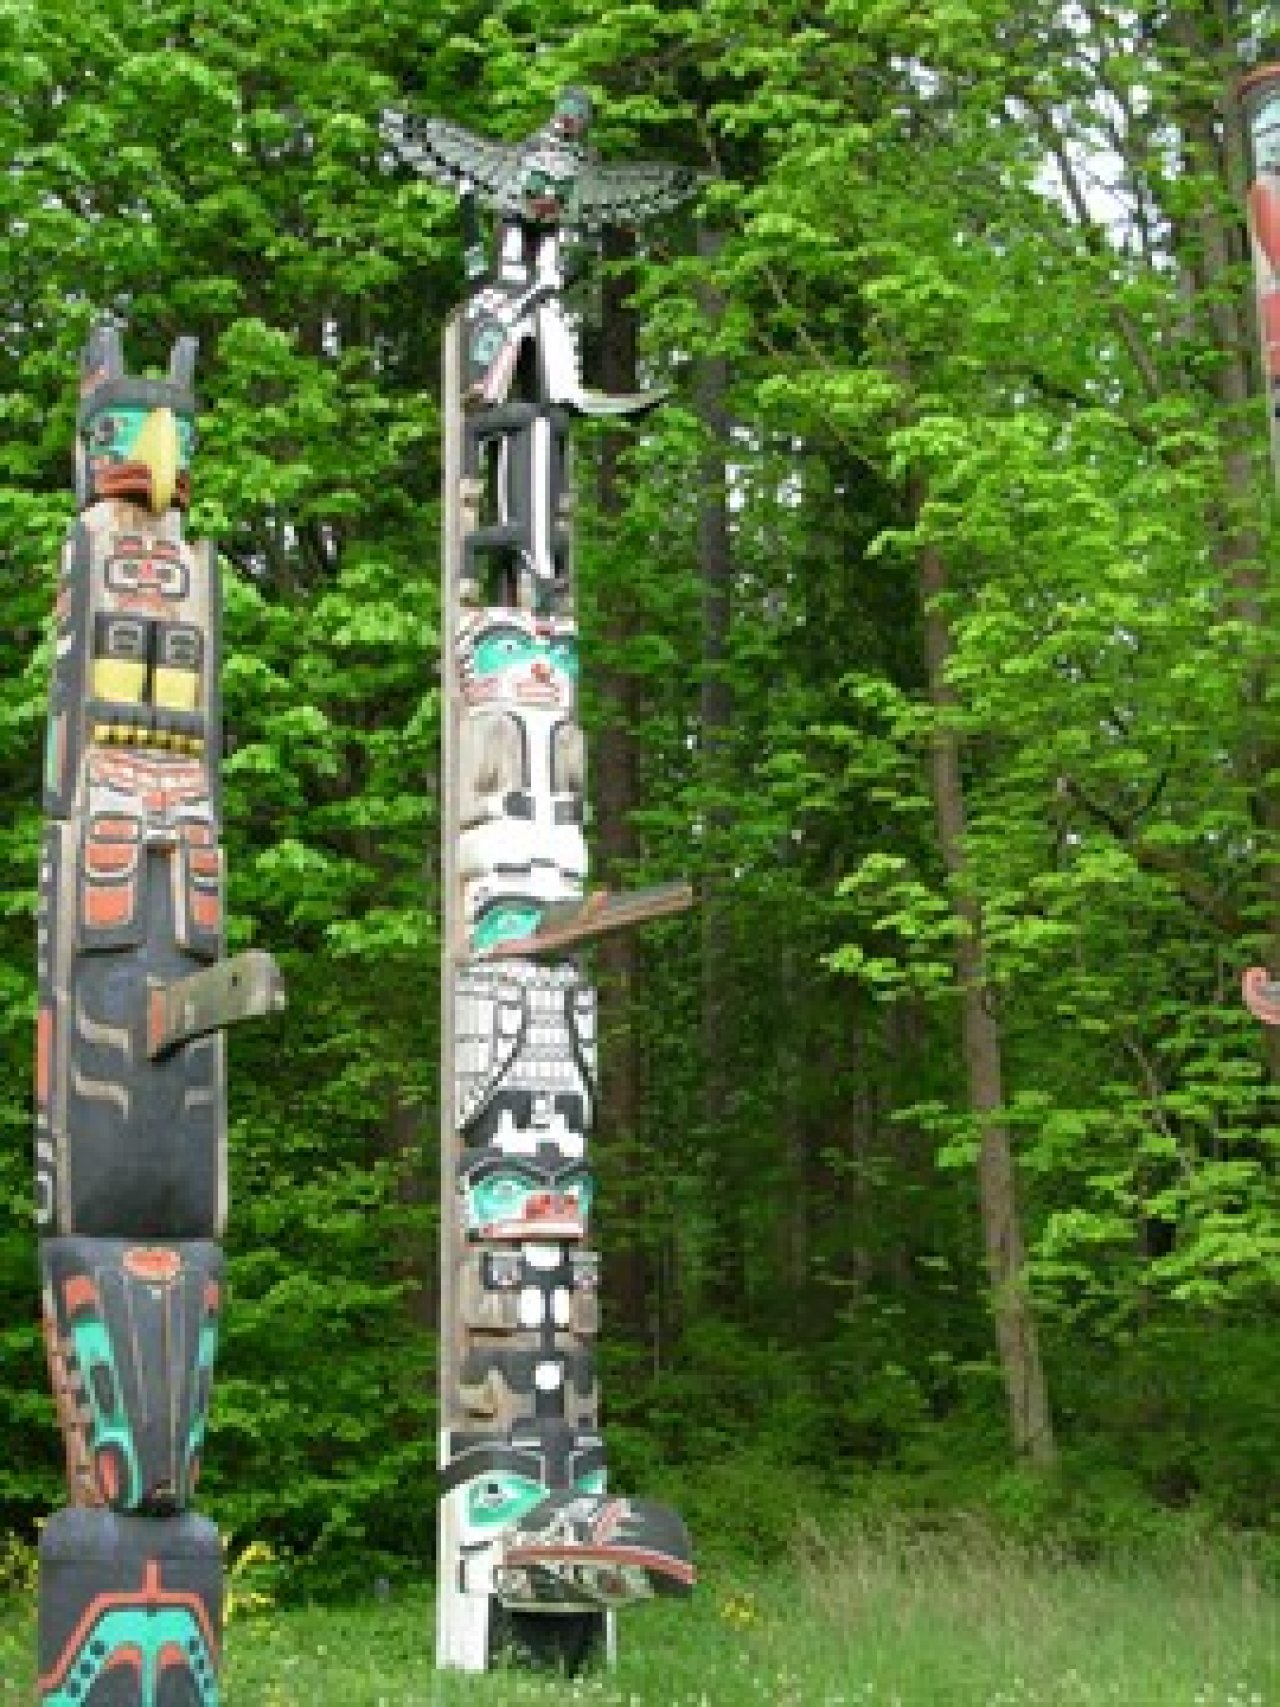 Chief Wakas Totem Pole (right)
Source: http://stanleyparkvan.com/stanley-park-van-attractions-totem-poles.html